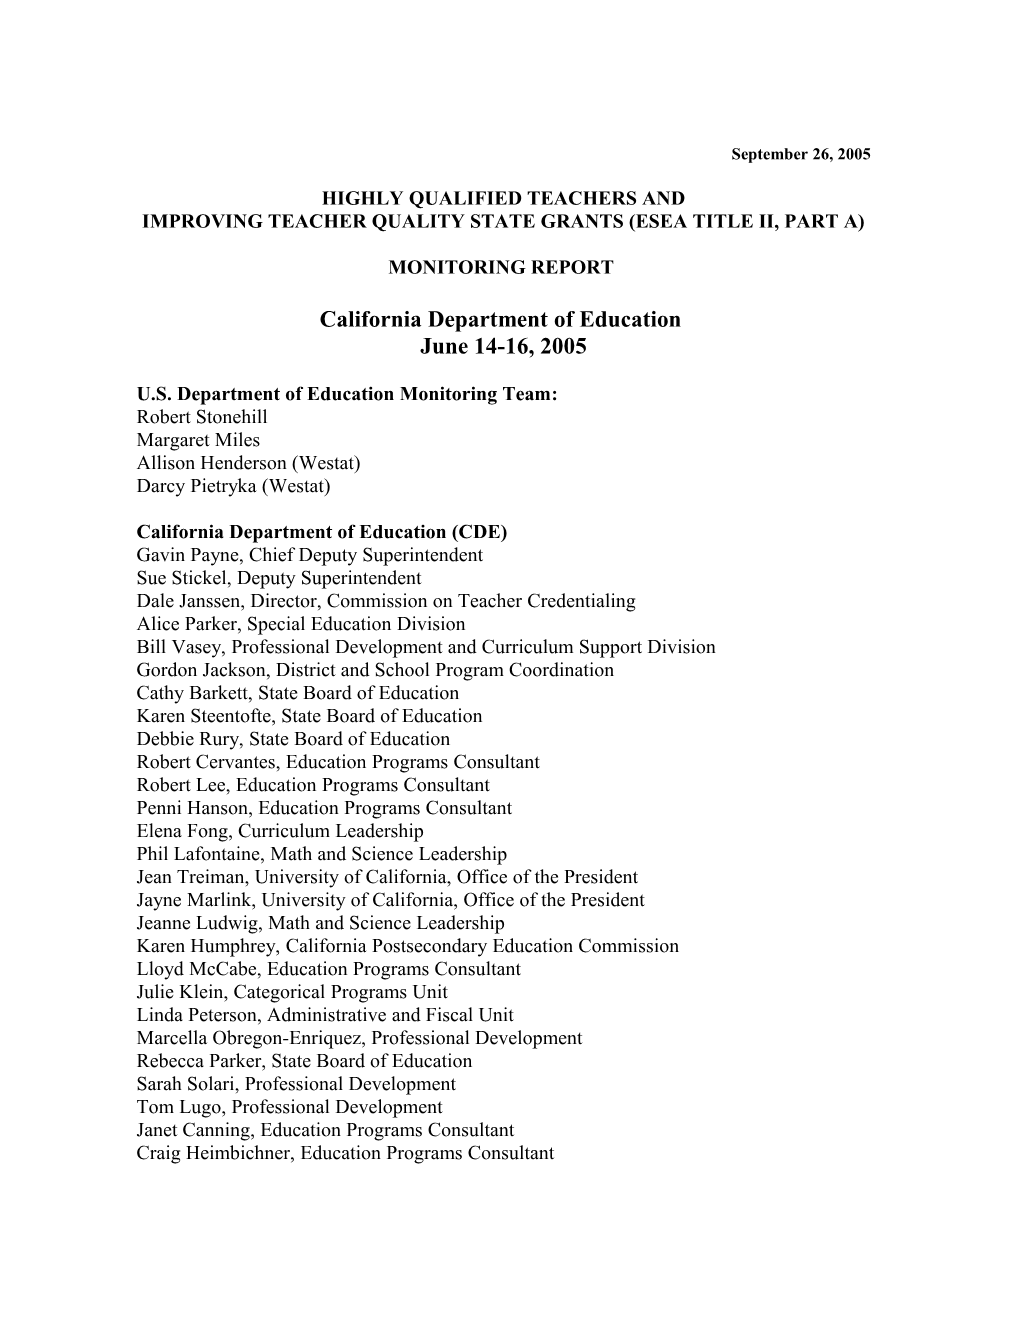 2005 California Monitoring Report: Highly Qualified Teachers and ESEA Title II, Part a (MS Word)